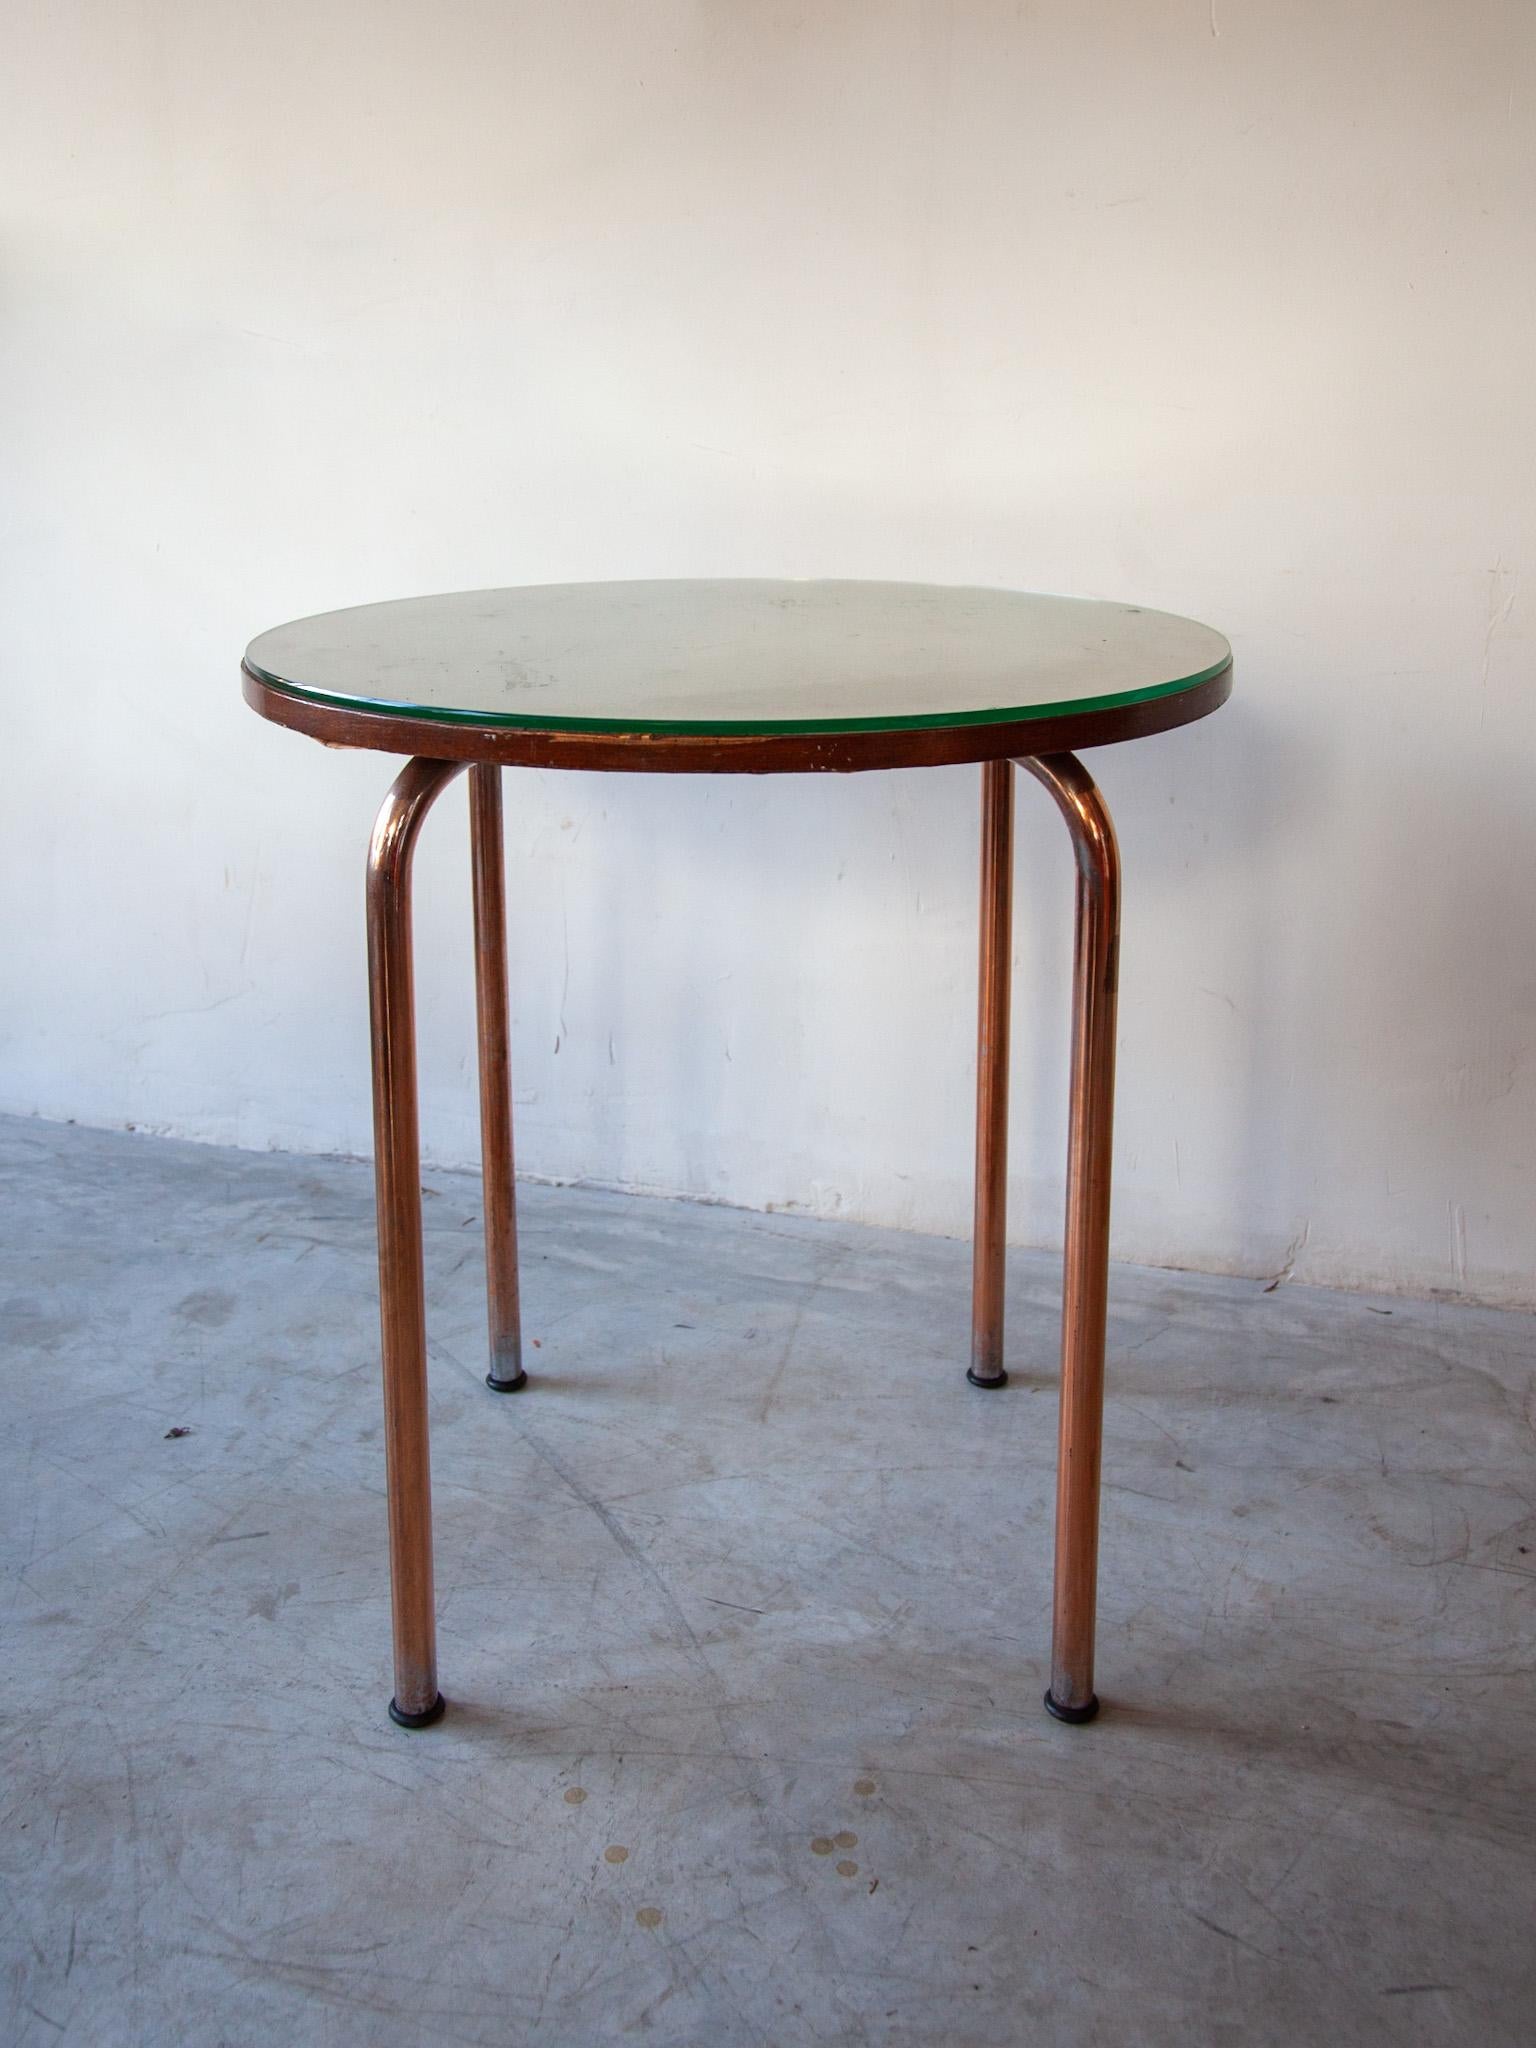 This coffee, side table was designed by Thonet in the 1930s. The table features a tubular brass metal base and a Beechwood top with round faceted glass. In good Vintage condition. Dimensions: Height: 70 cm, Diameter: 60 cm.